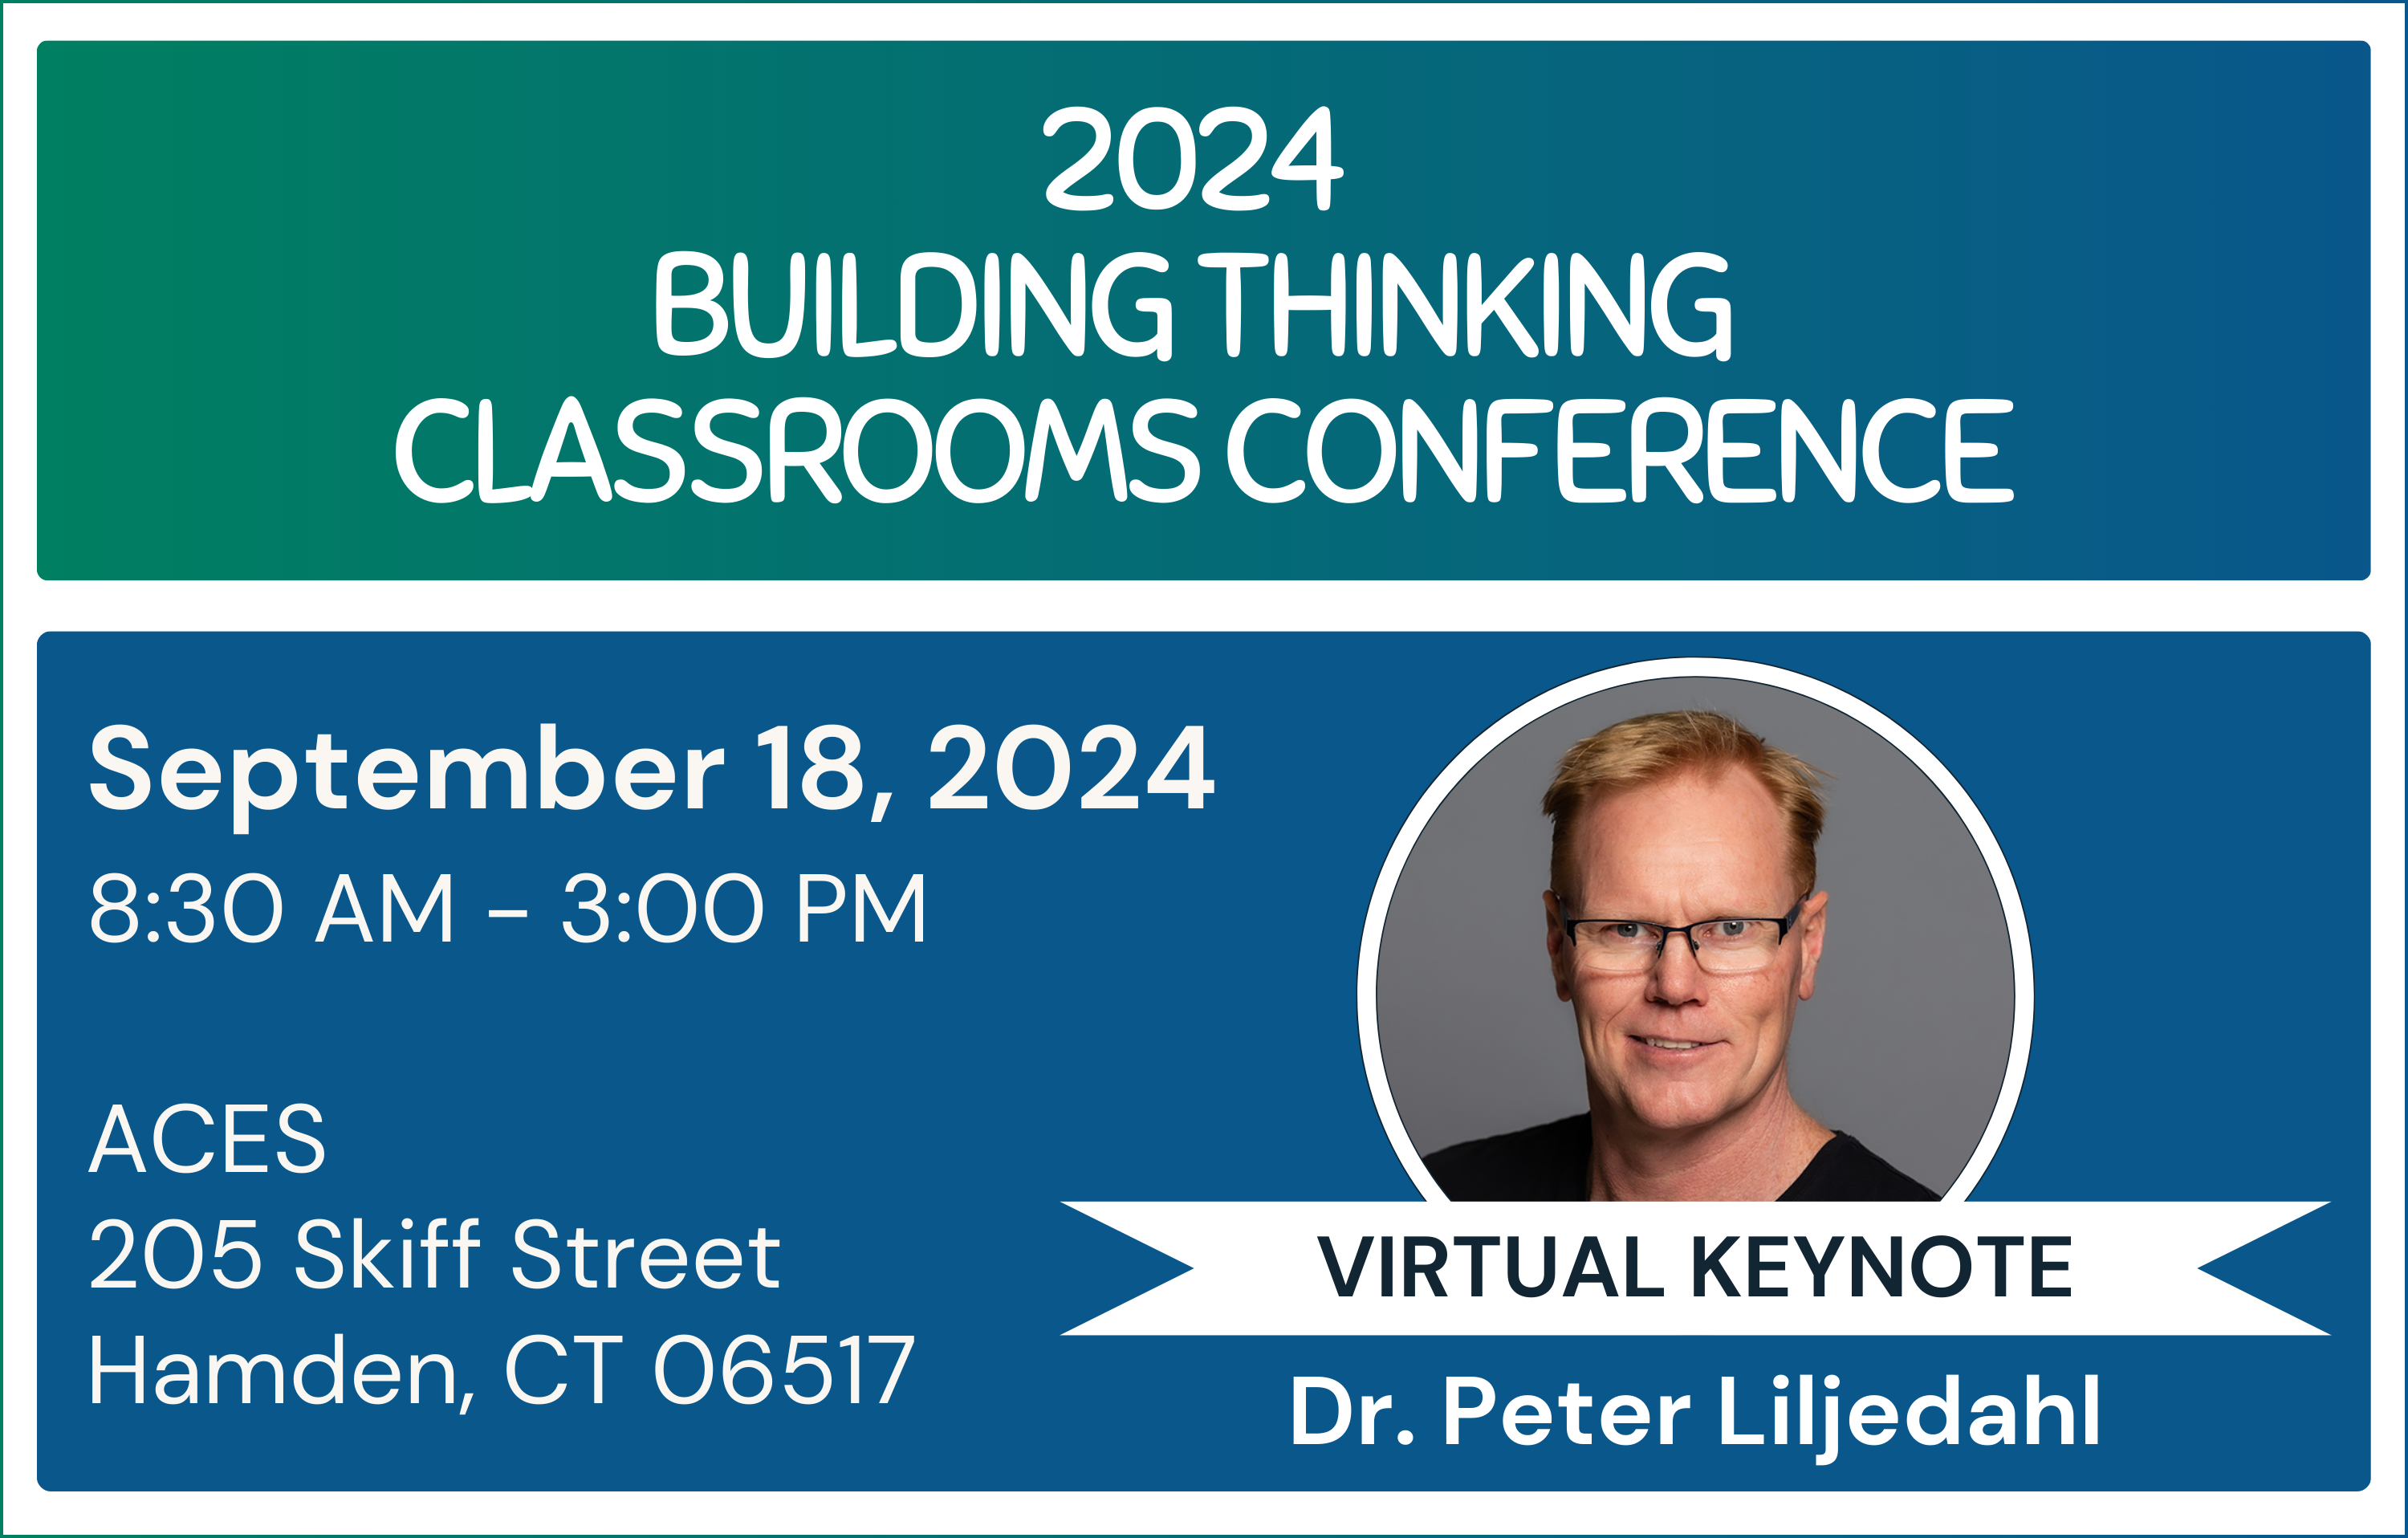 Register for the 2024 Building Thinking Classrooms Conference.